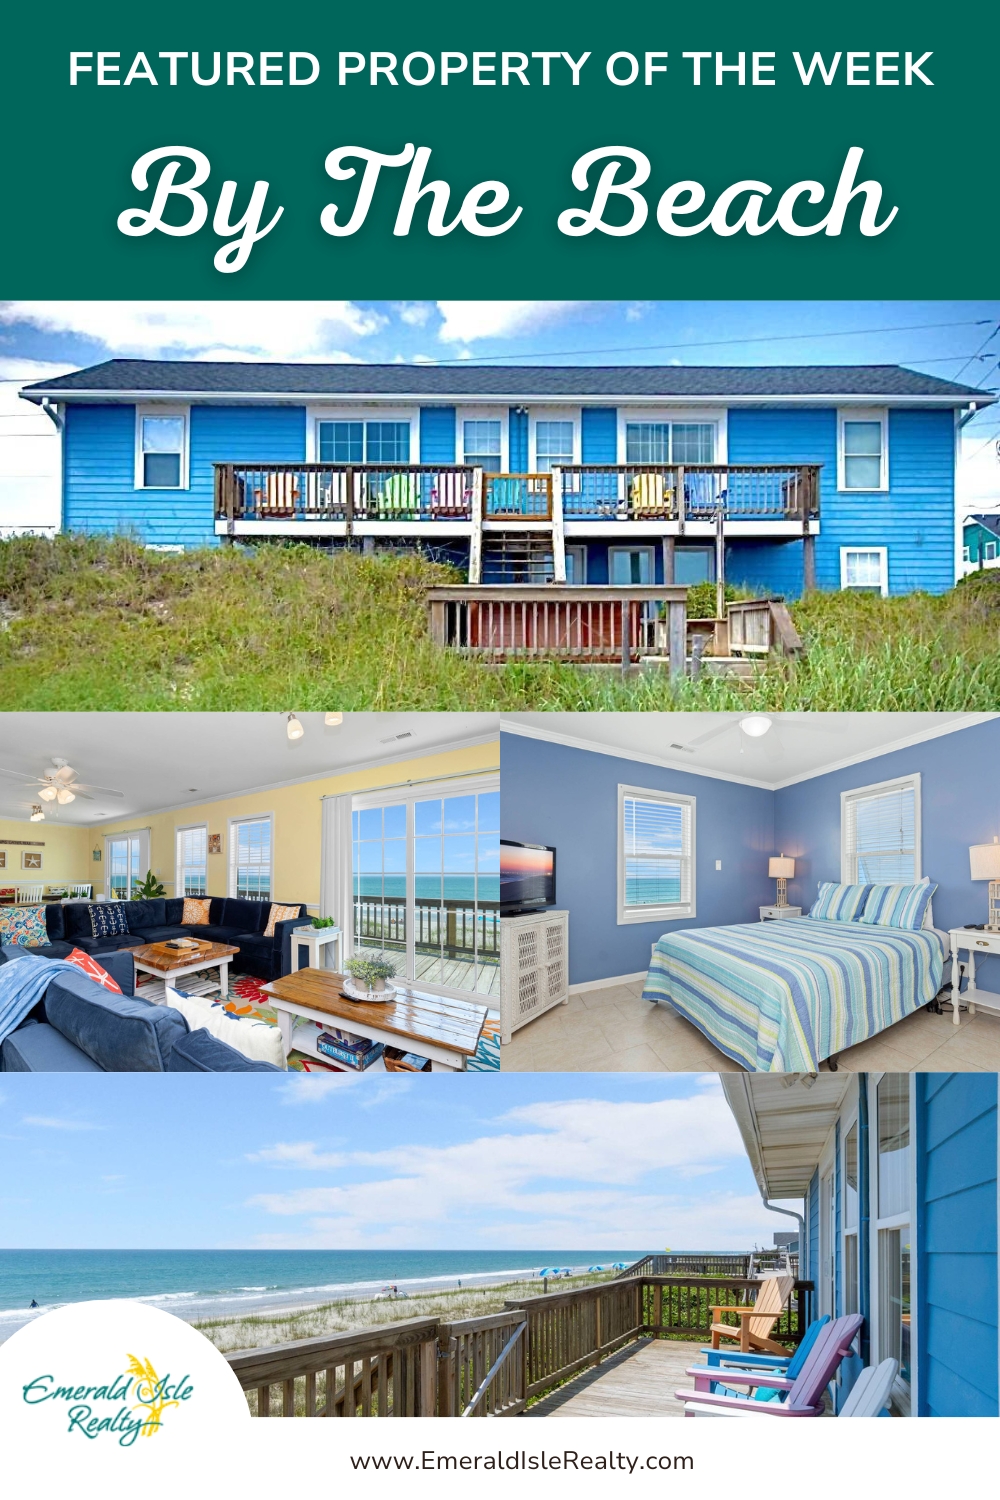 Featured Property of the Week: By the Beach